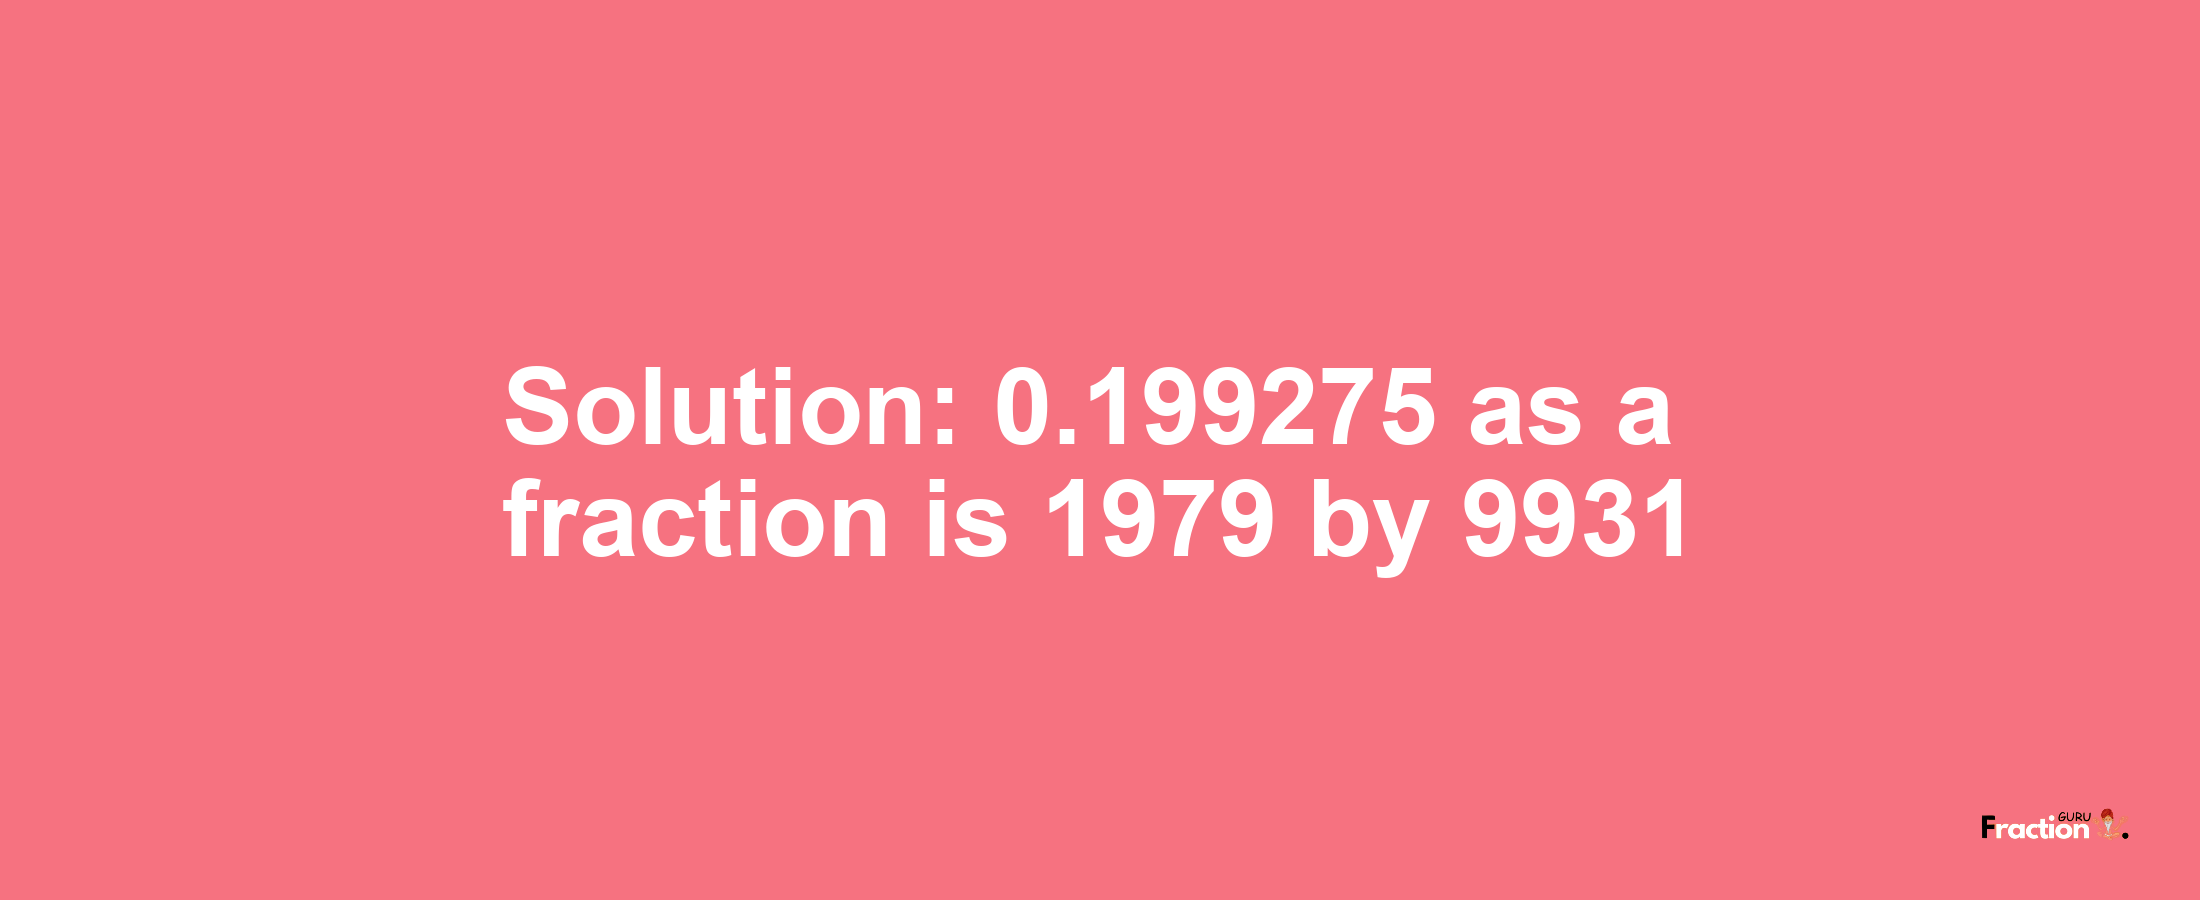 Solution:0.199275 as a fraction is 1979/9931